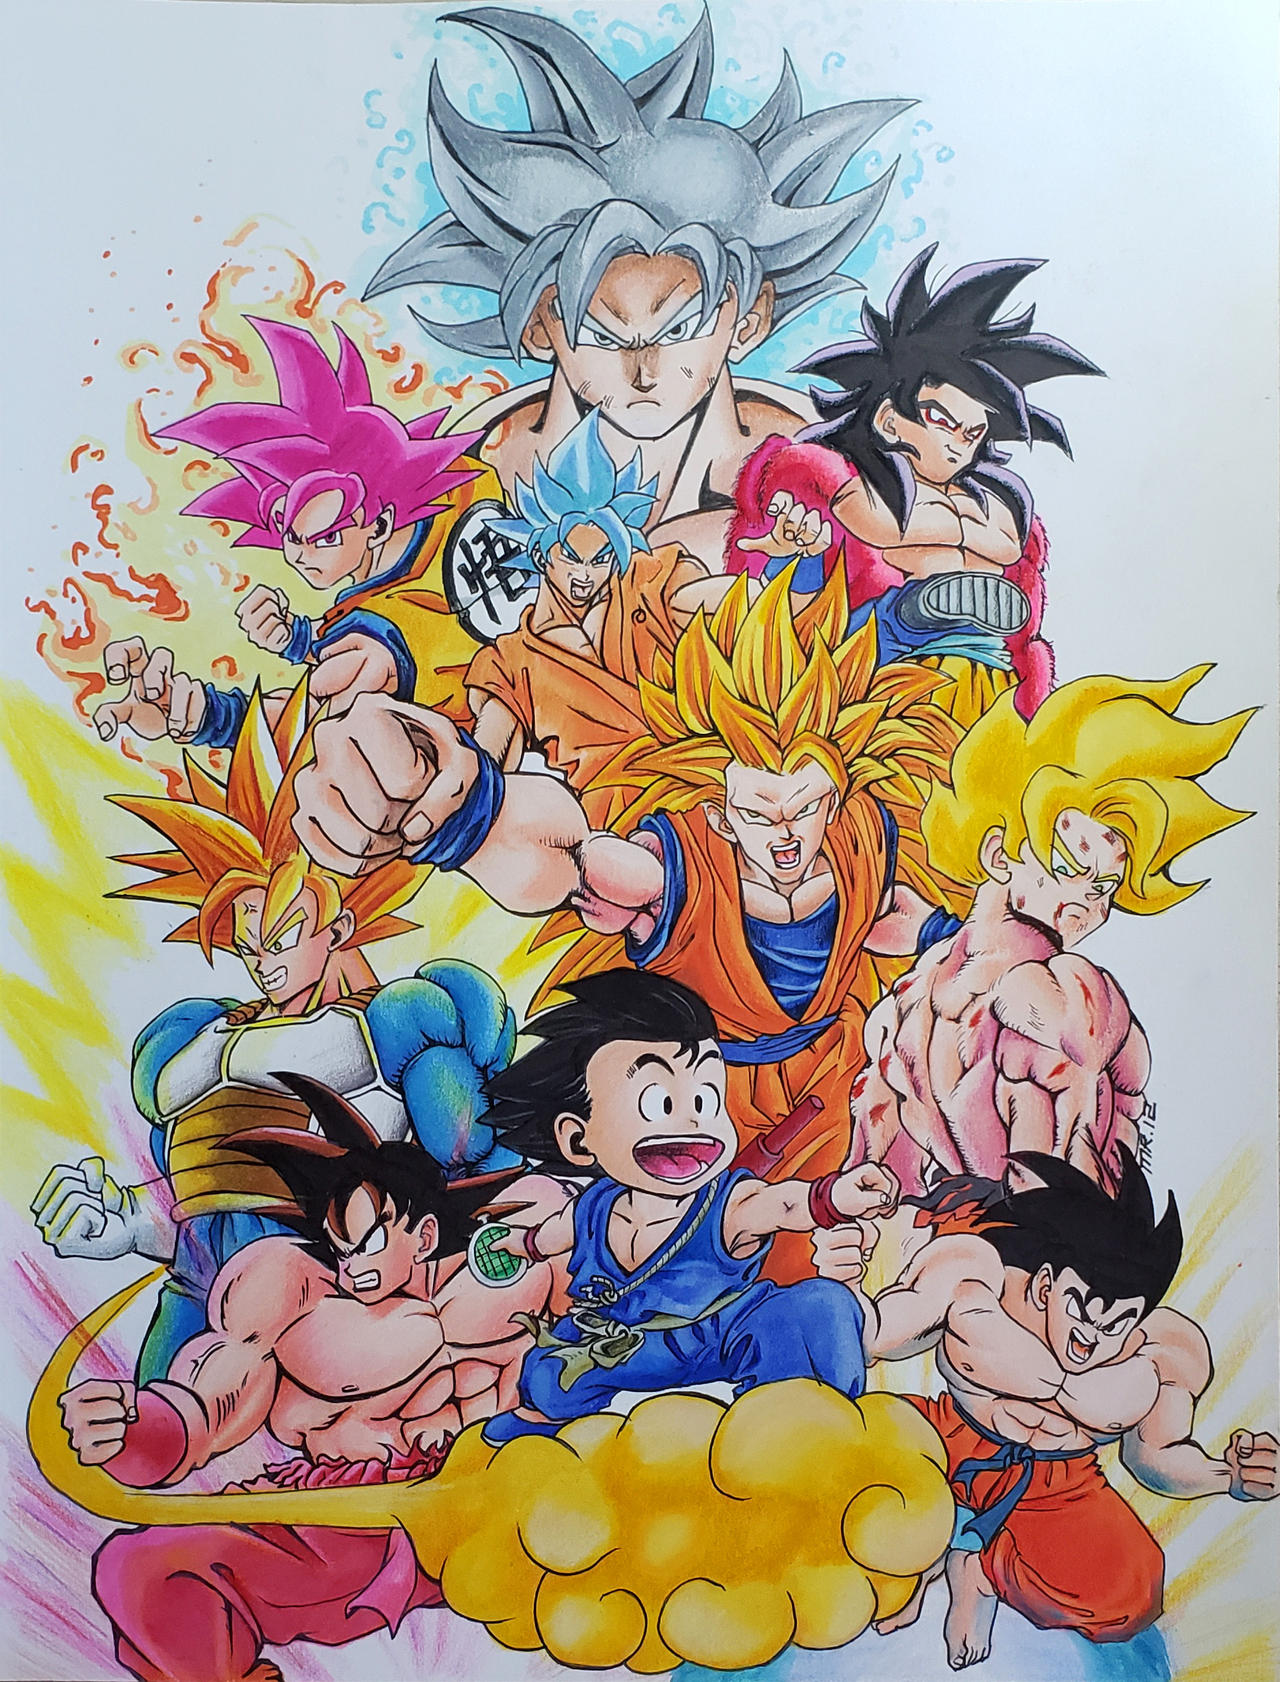 Dragon Ball Z: 10 Differences Between The Anime And The Manga